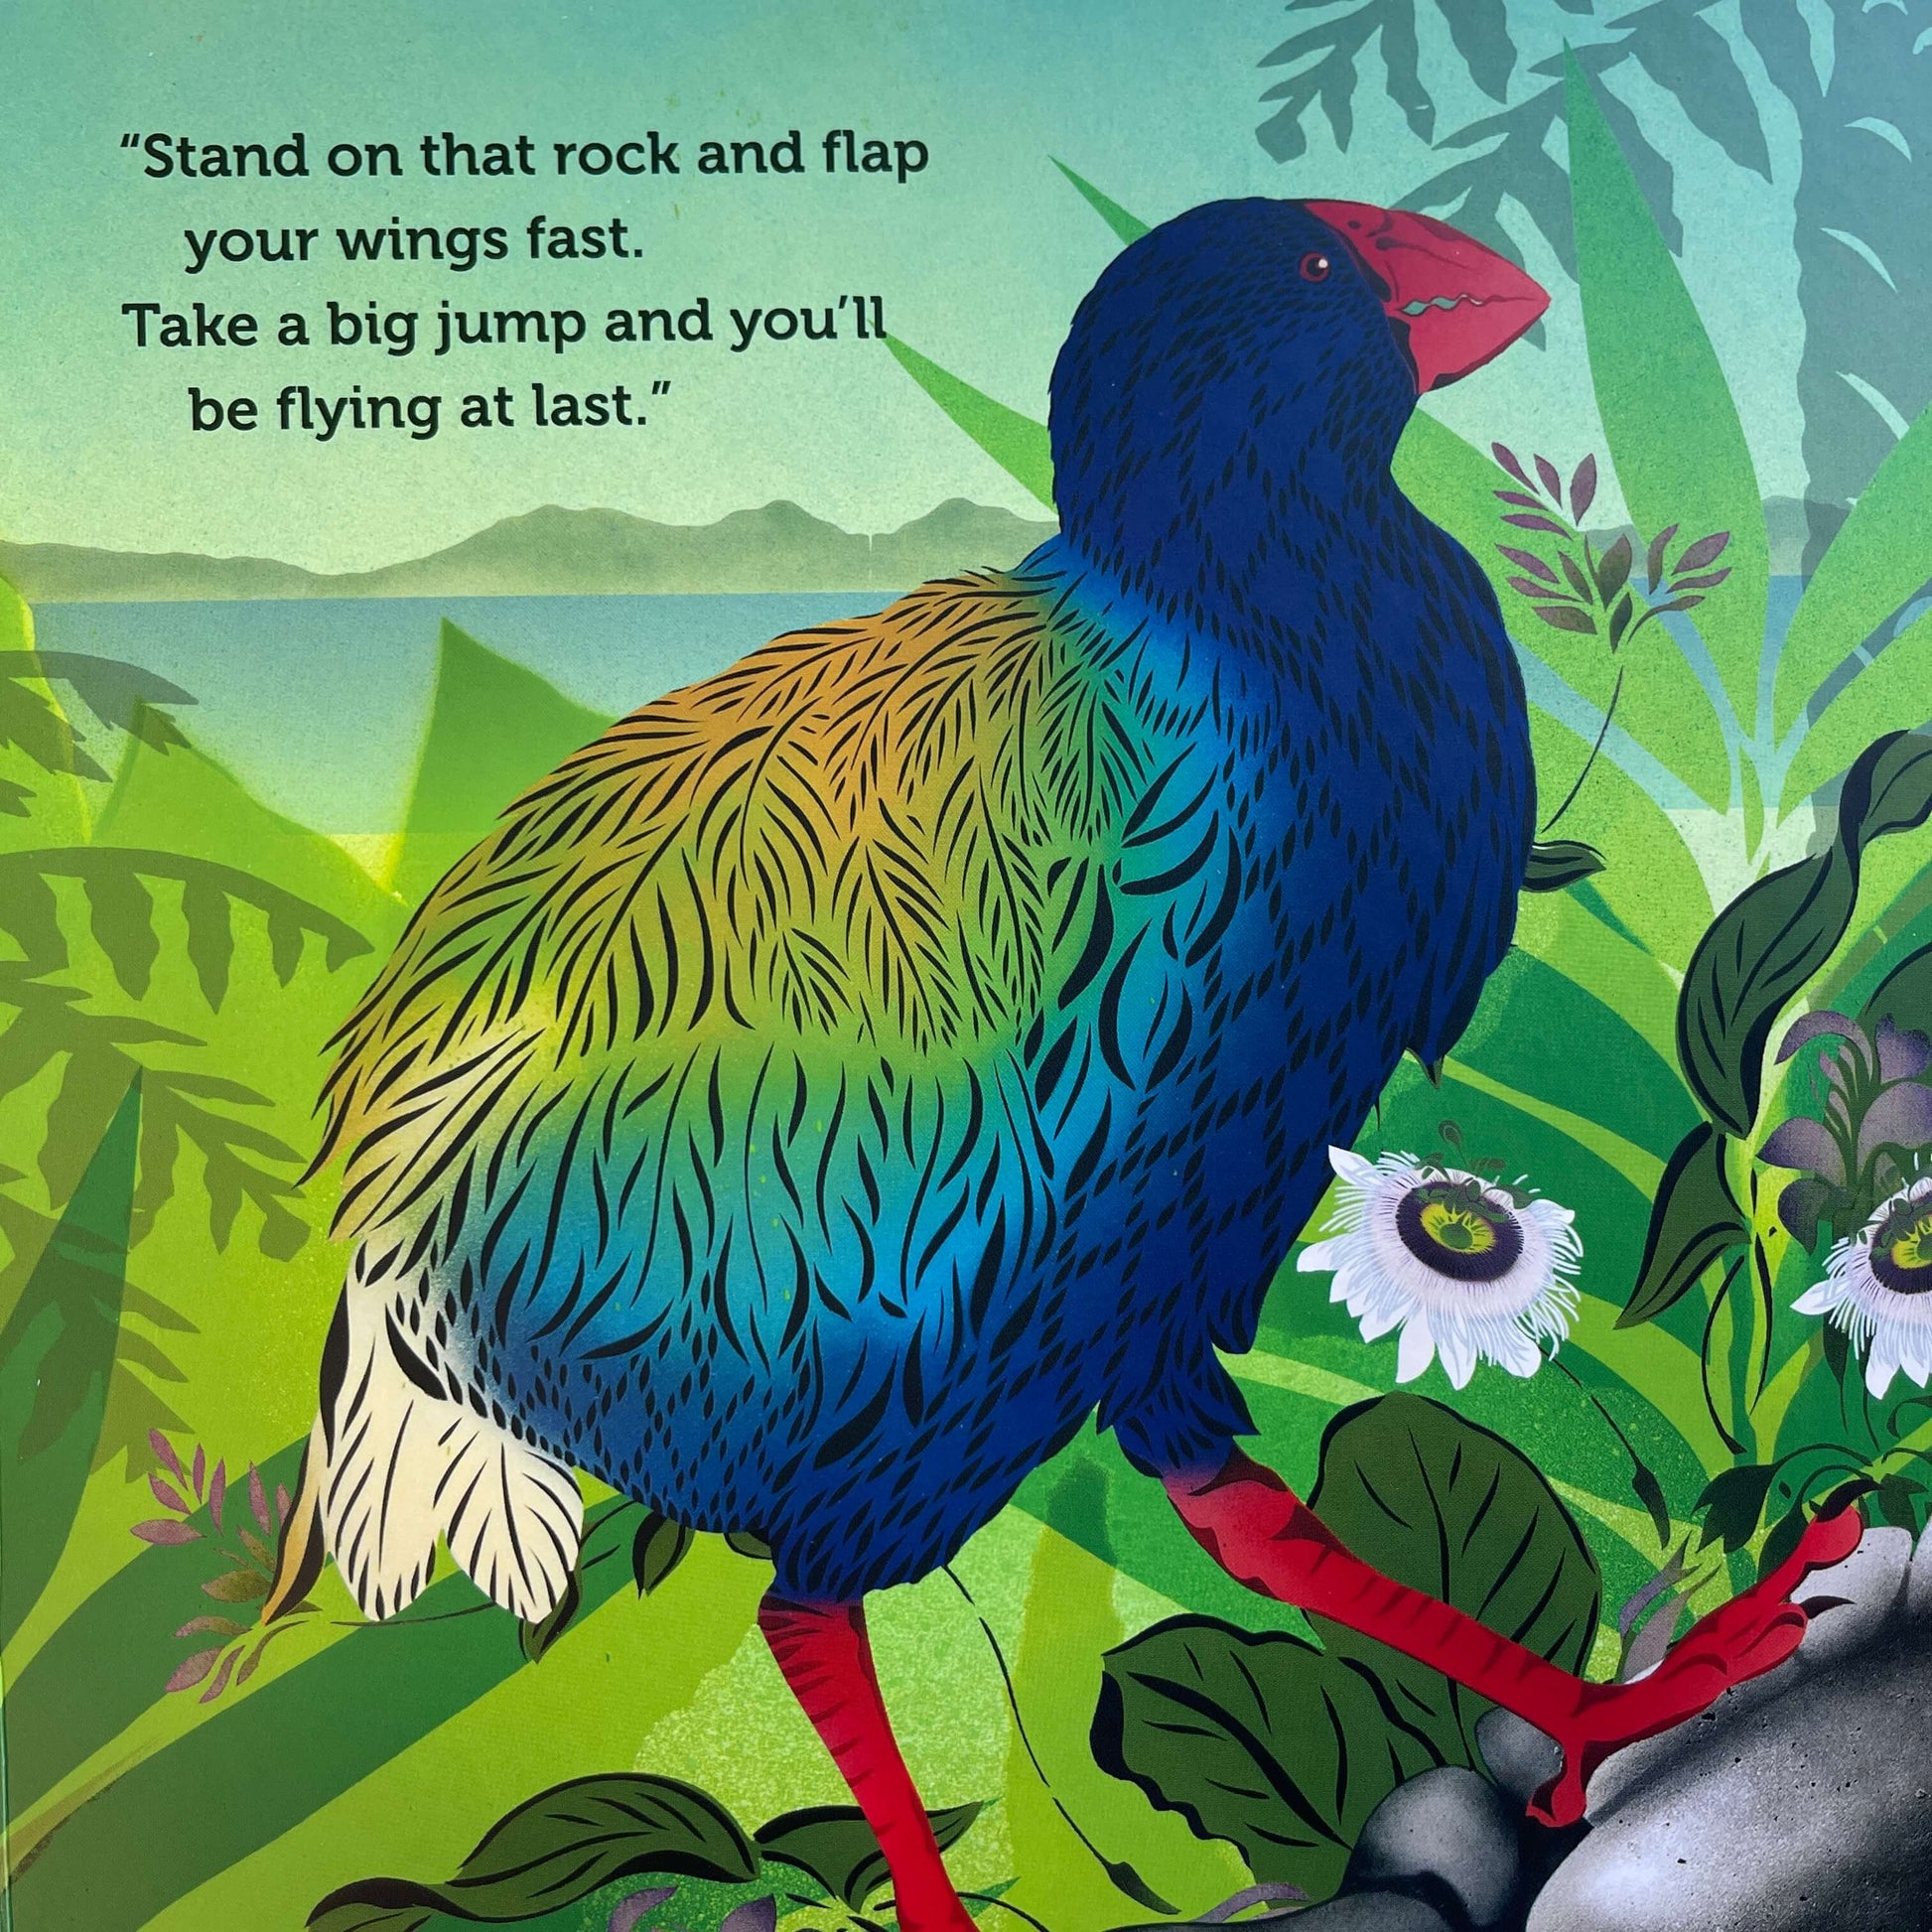 Page from Children's book Tu Meke Tui by Malcolm Clarke and illustrated by Flox.